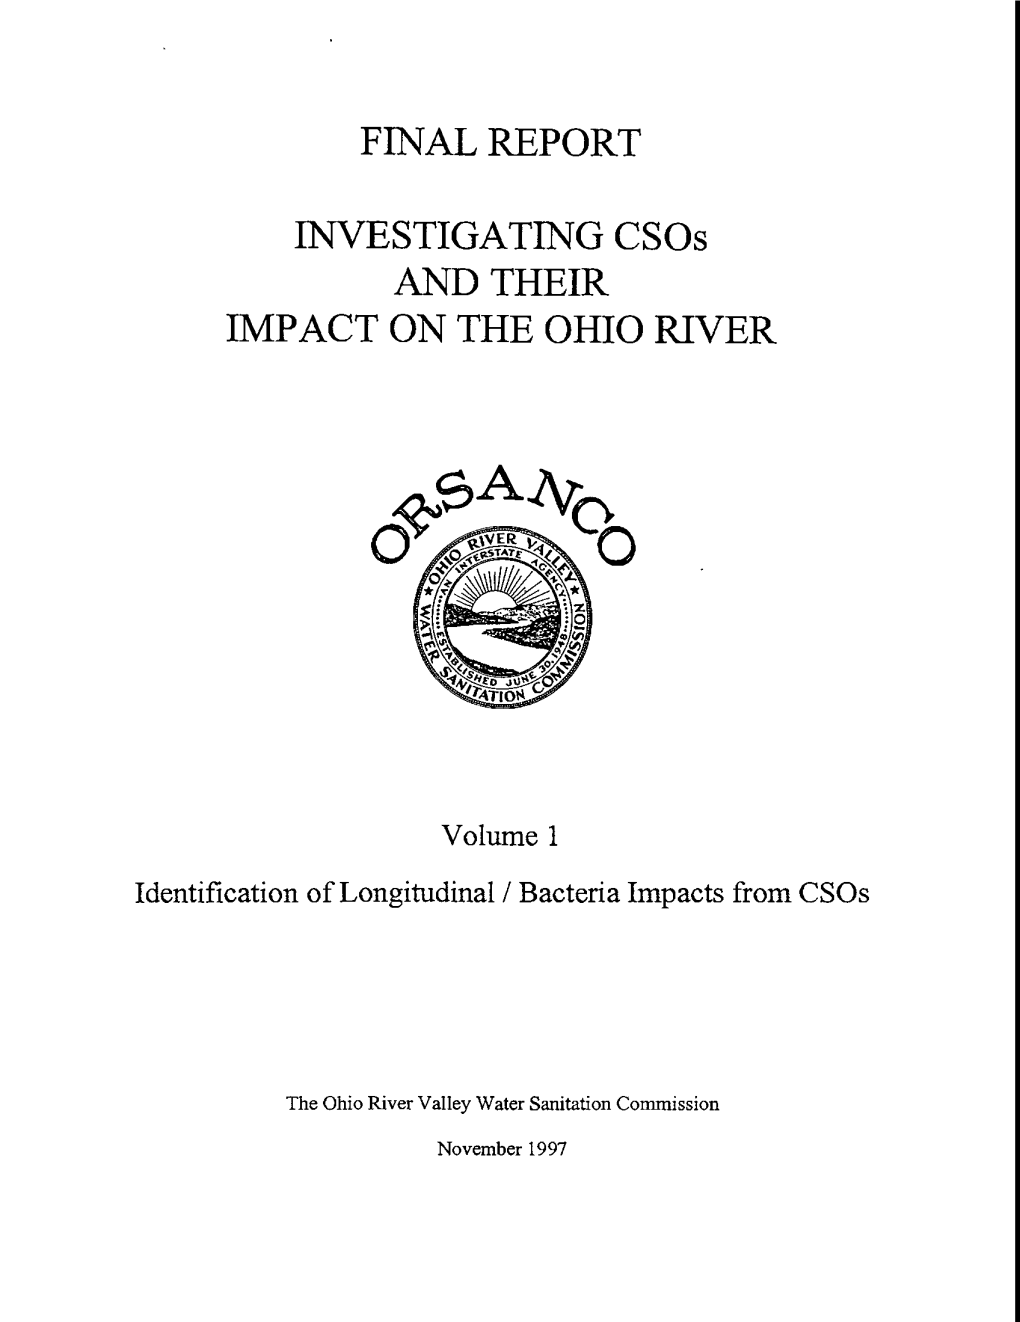 FINAL REPORT INVESTIGATING Csos and THEIR IMPACT ON